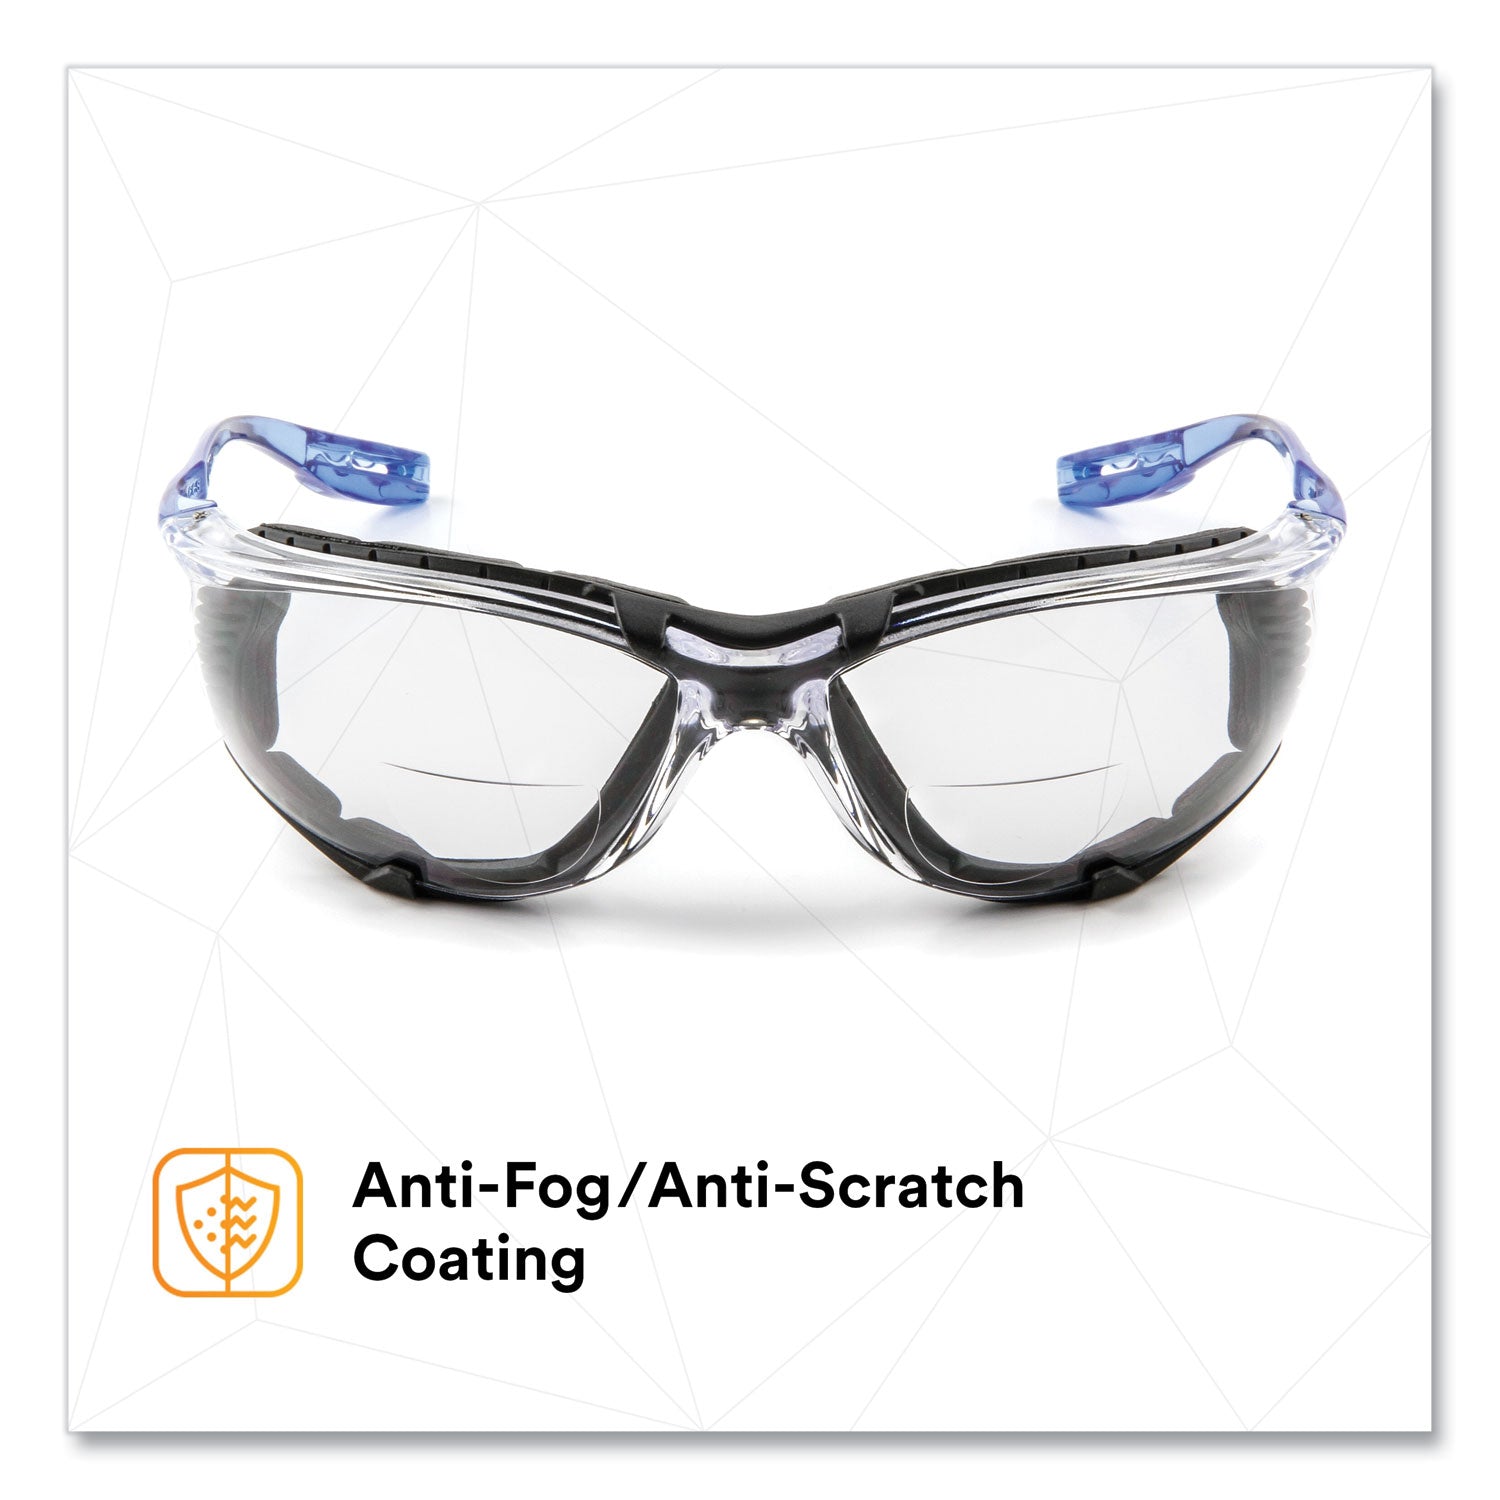 ccs-protective-eyewear-with-foam-gasket-+15-diopter-strength-blue-plastic-frame-clear-polycarbonate-lens_mmmvc215af - 2